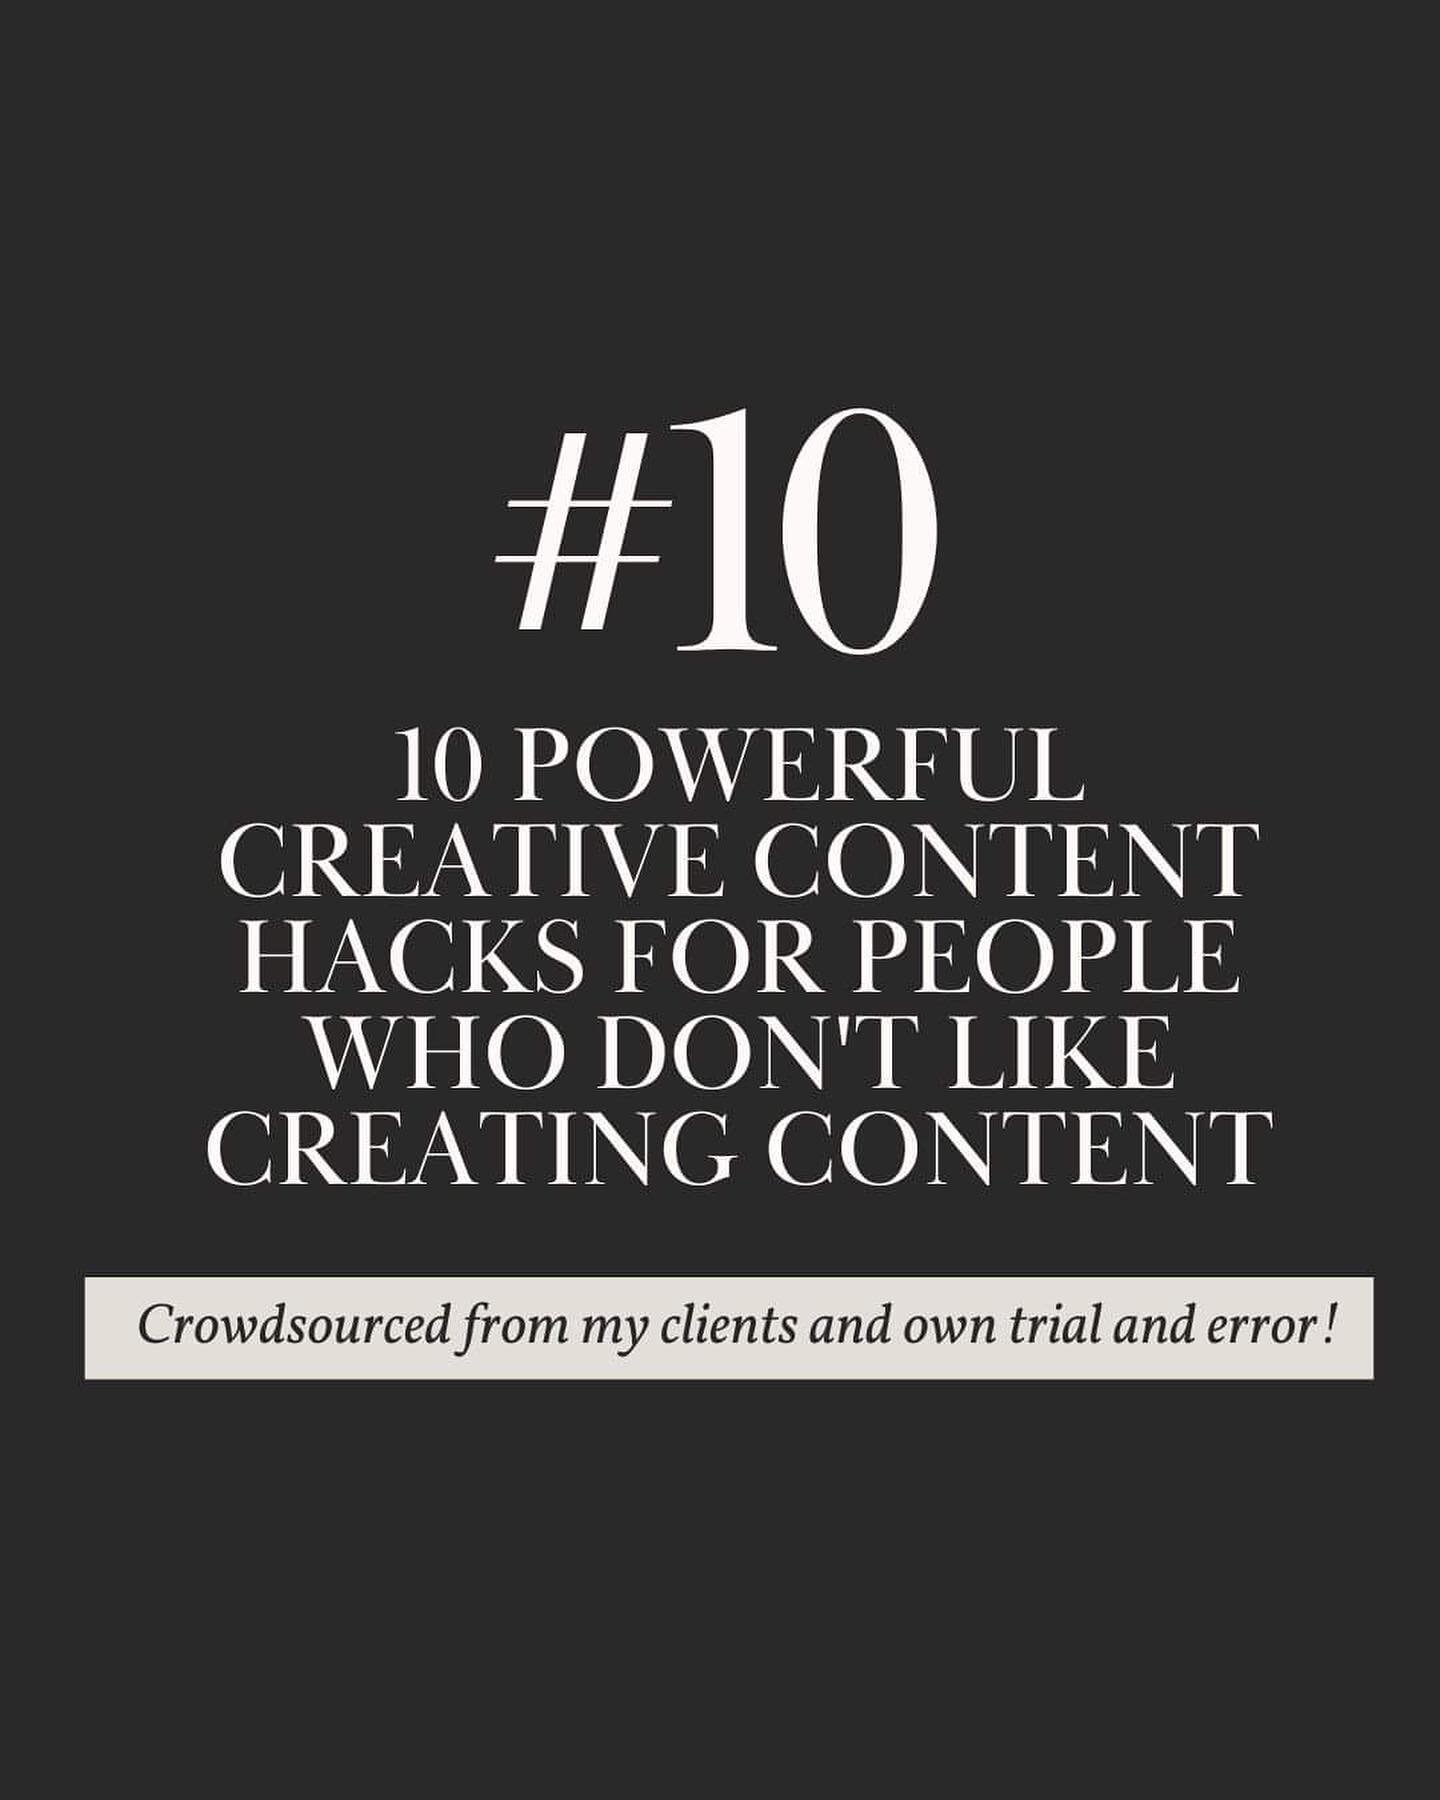 Most are surprised to hear that I don&rsquo;t really like creating content&hellip;

But it&rsquo;s not really the process of content creation I don&rsquo;t like&hellip; it&rsquo;s the idea of having to force myself to create for the sake of creating 